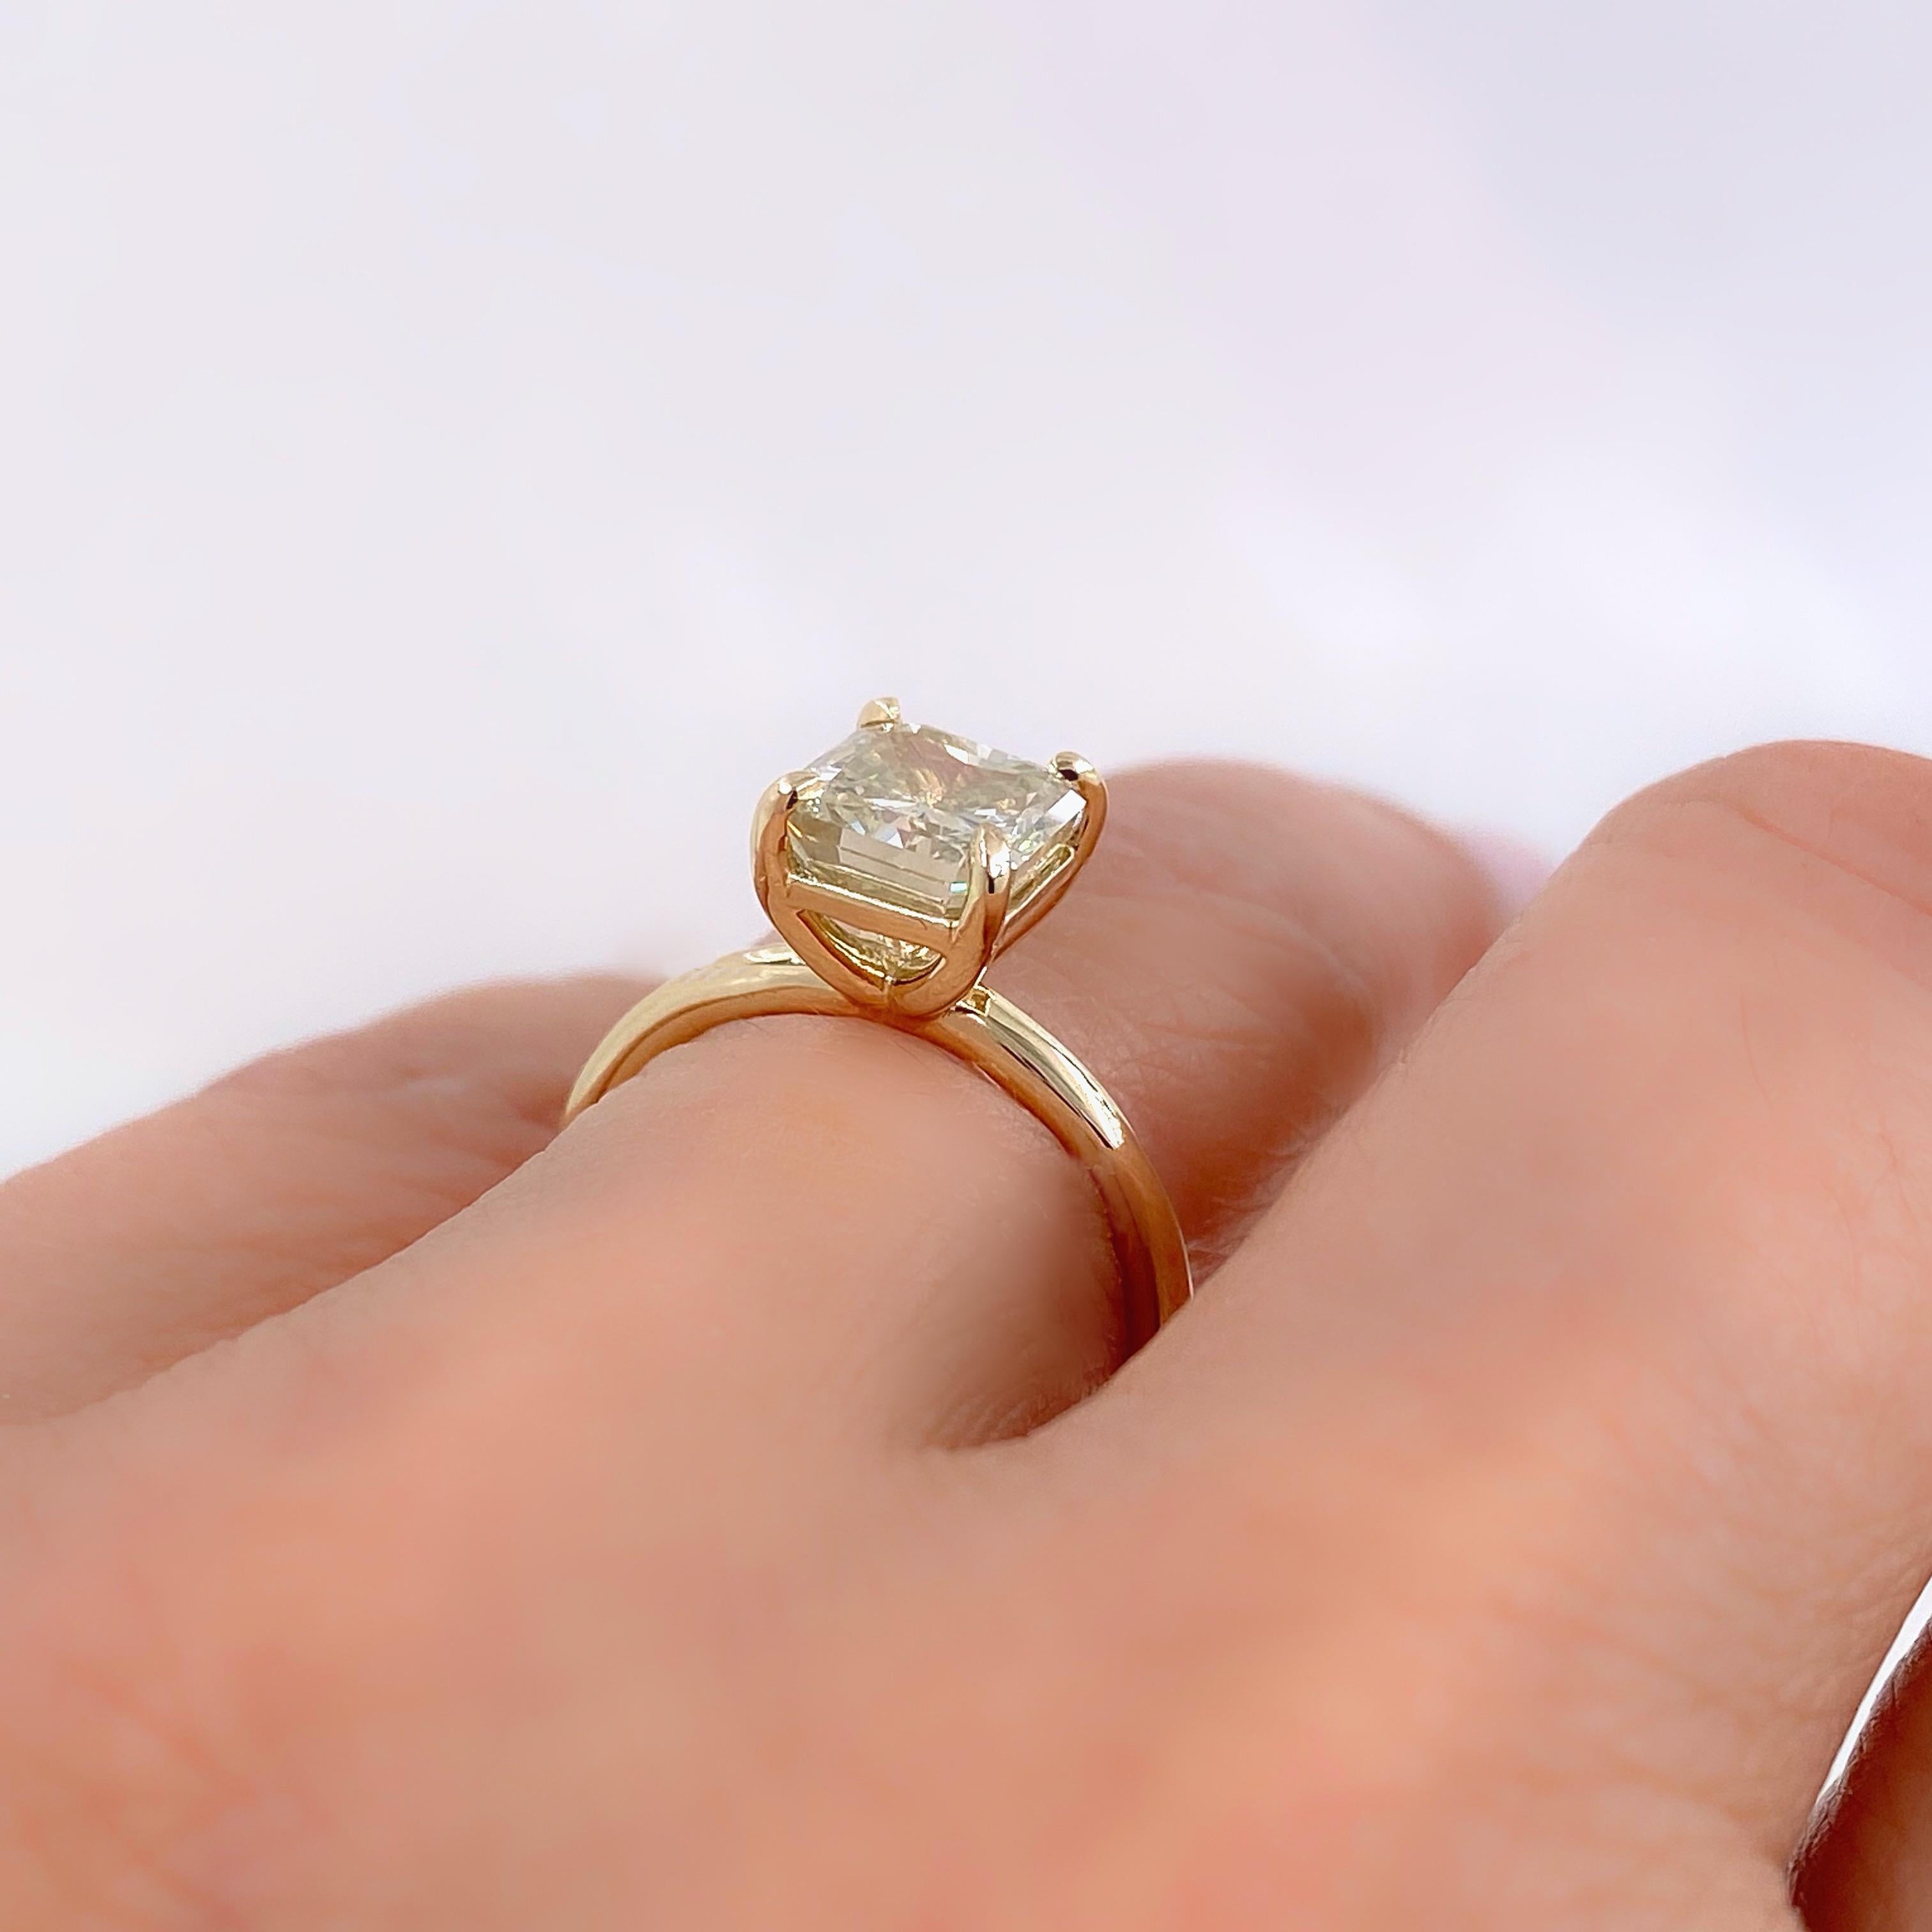 Fancy Greyish Yellow Radiant Cut 2.10 Carat Diamond Solitaire Ring 14 Karat EGL In Excellent Condition For Sale In San Diego, CA